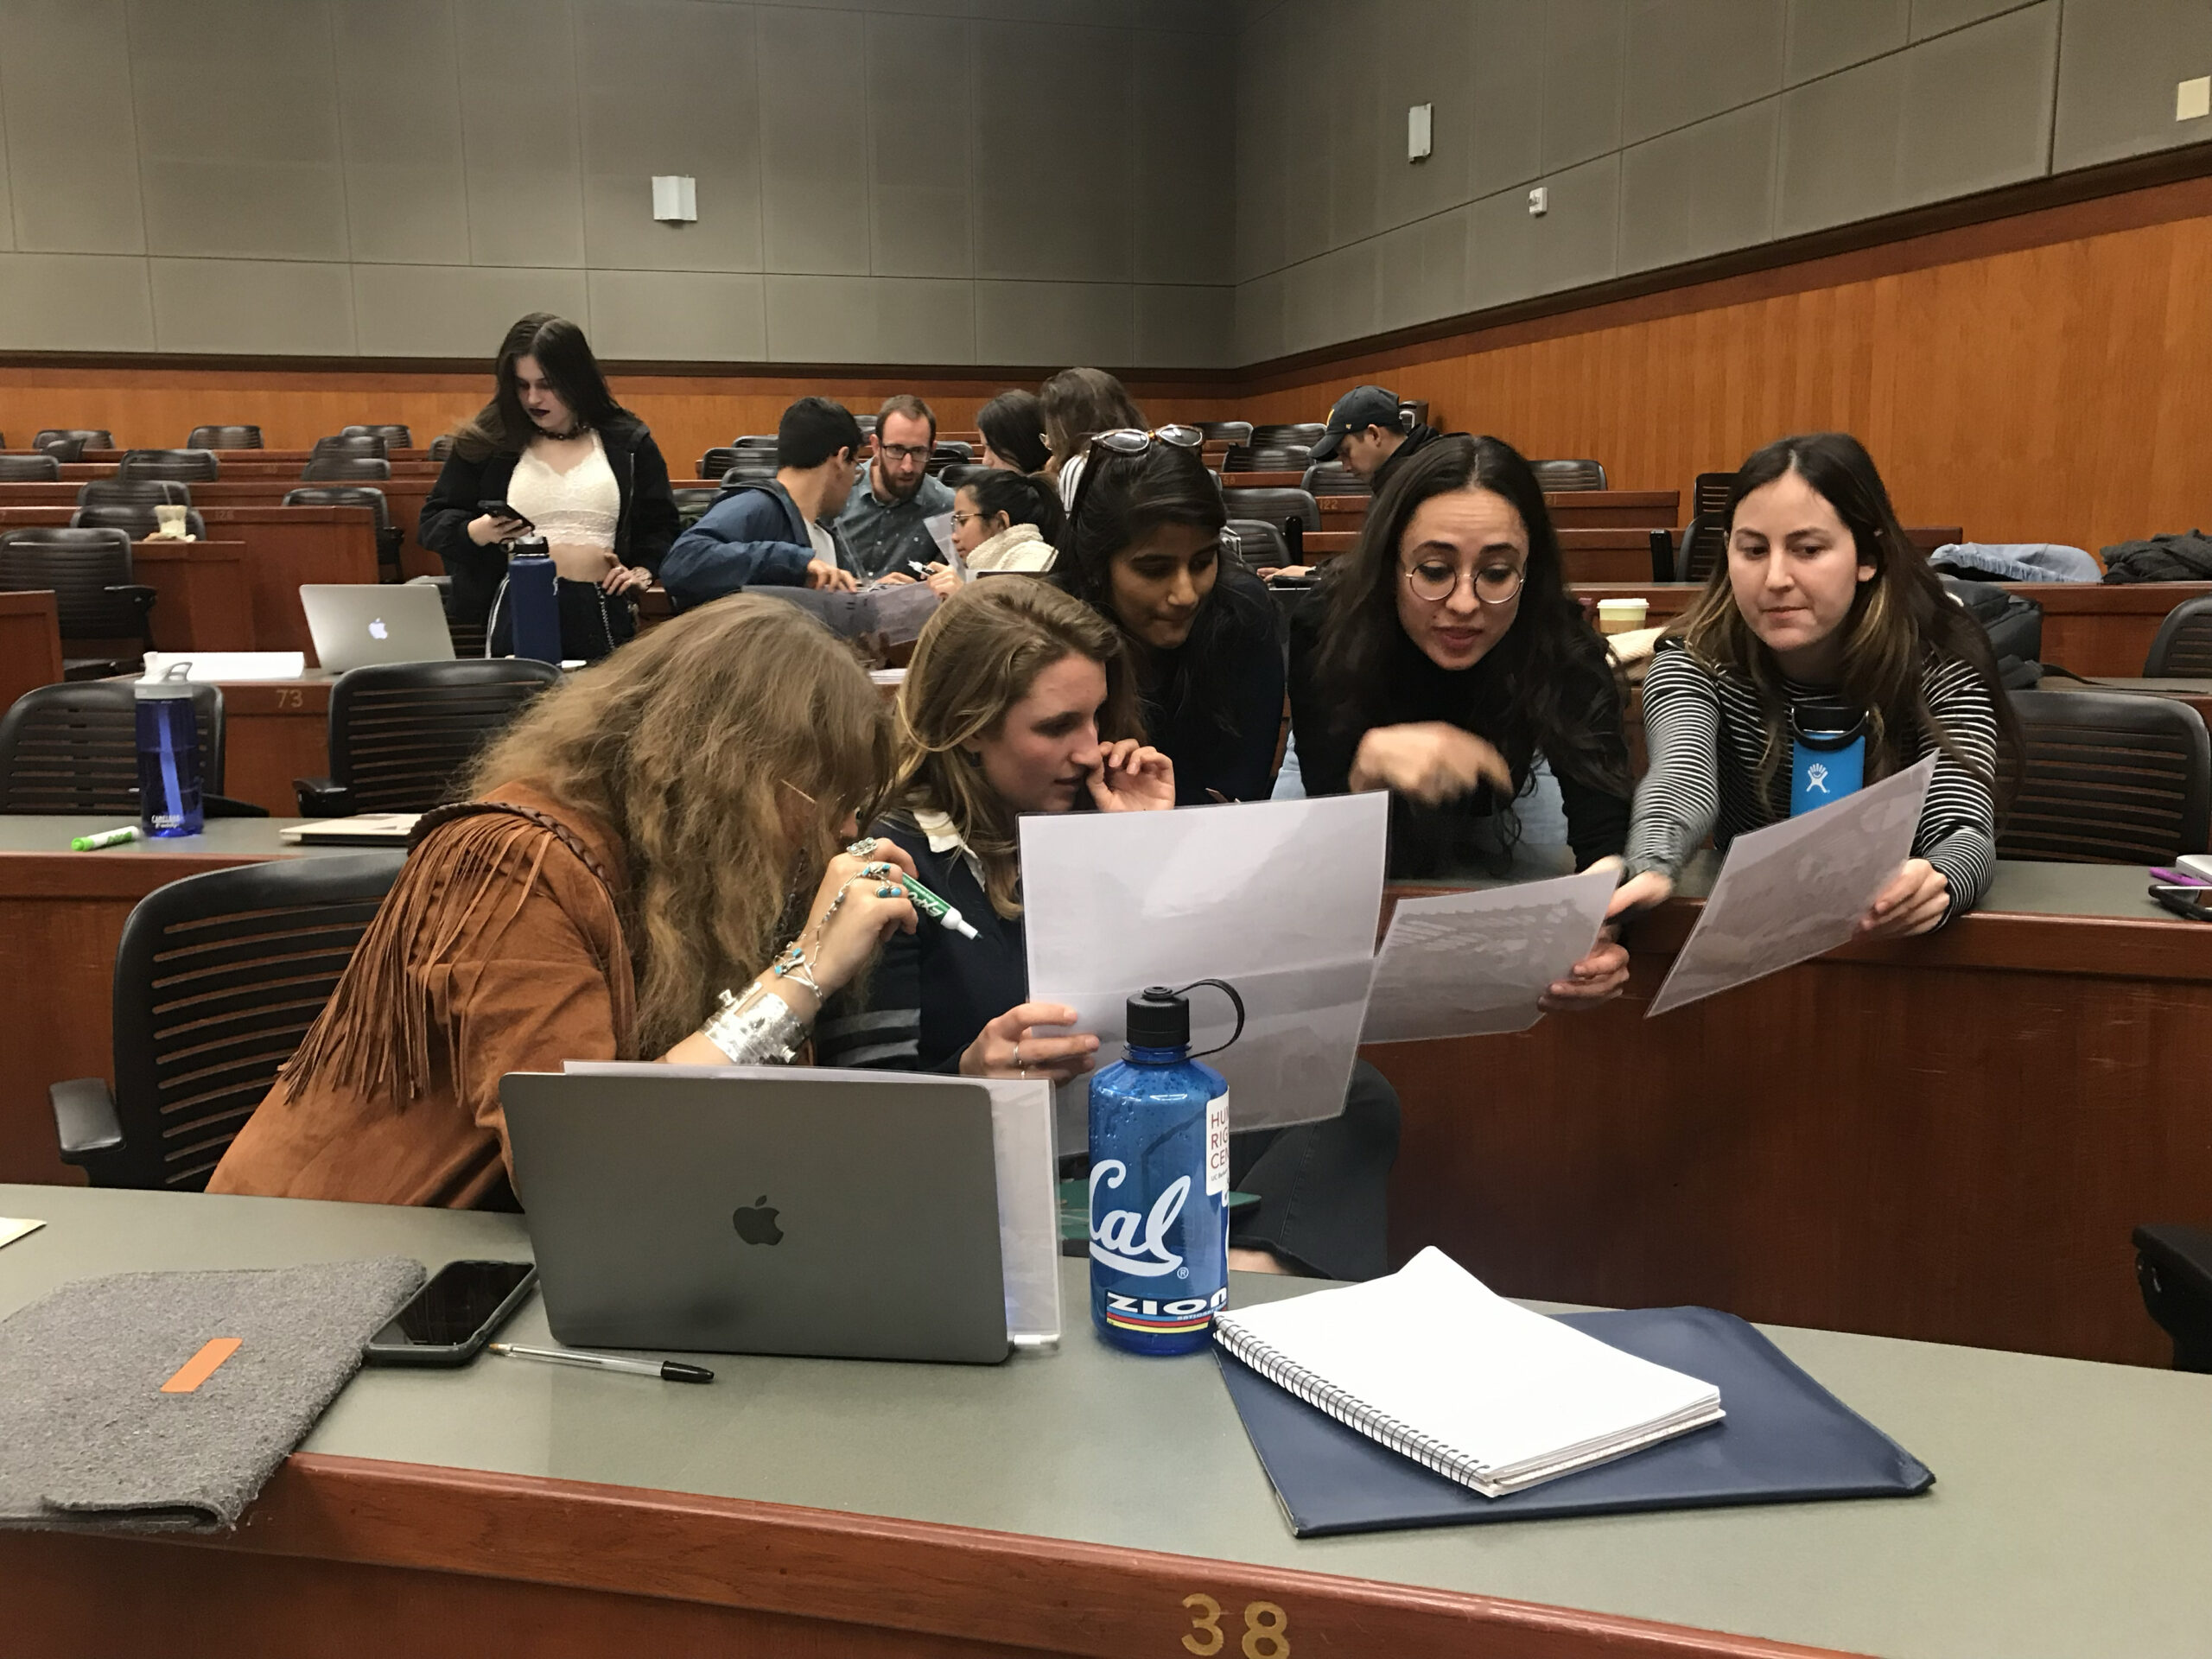 A group of people sit in an auditorium, there is a laptop and several papers.